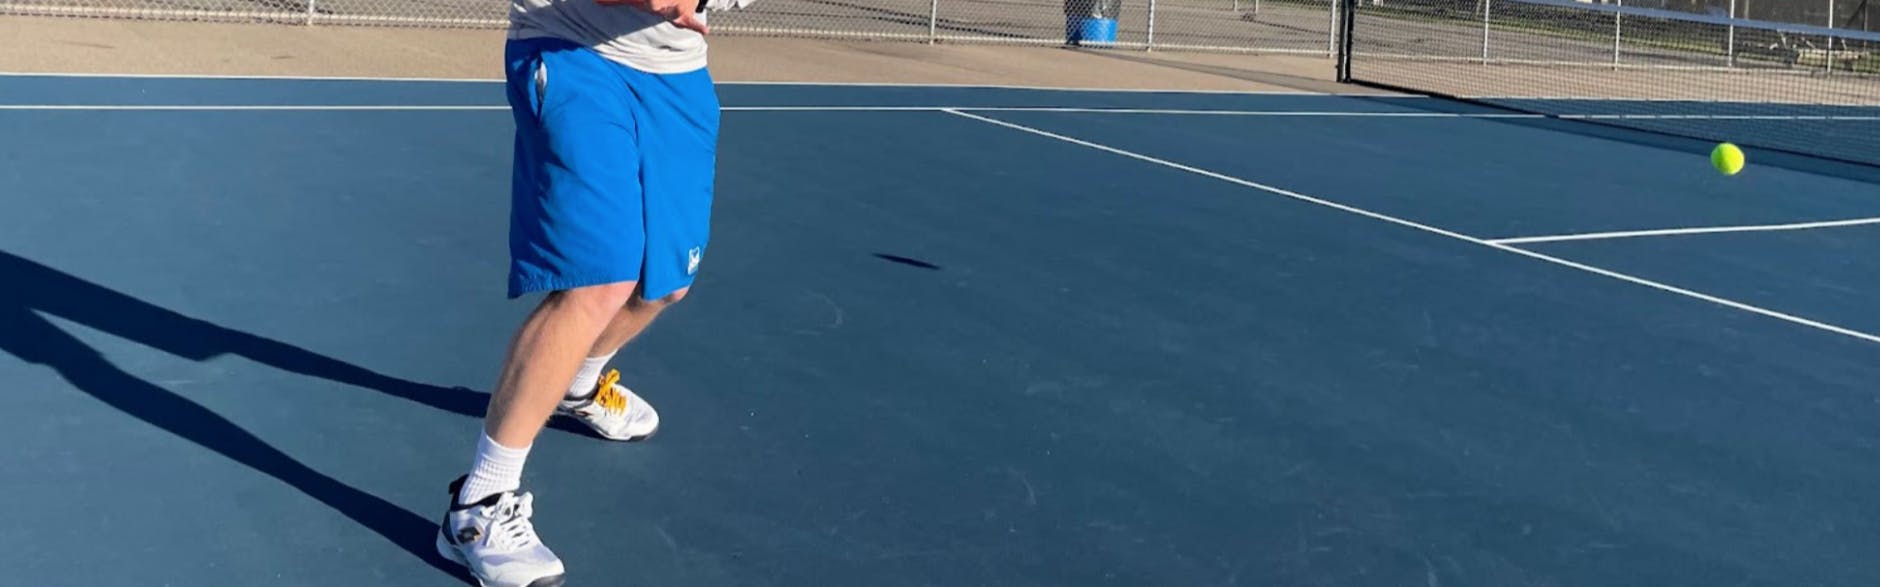 A tennis player using the Lotto Mirage 200 Speed Shoes.